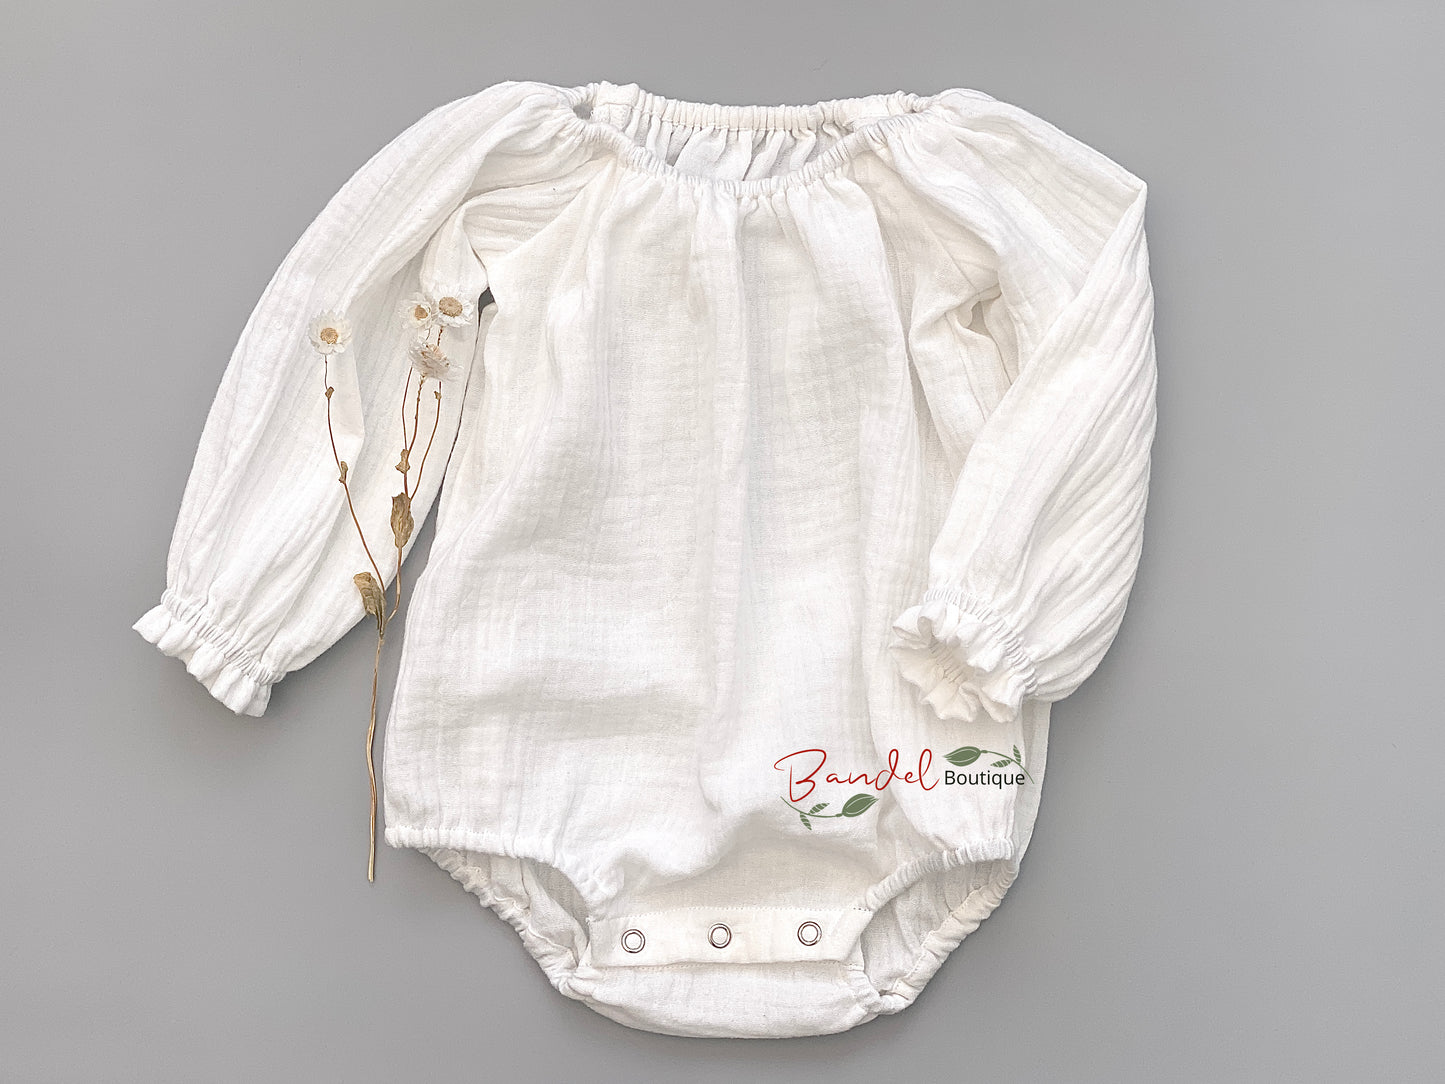 Handmade white minimalist newborn baby romper with long sleeves, made from breathable and soft double gauze organic fabric. Features elasticized openings and crotch snaps for easy dressing and maximum comfort. 